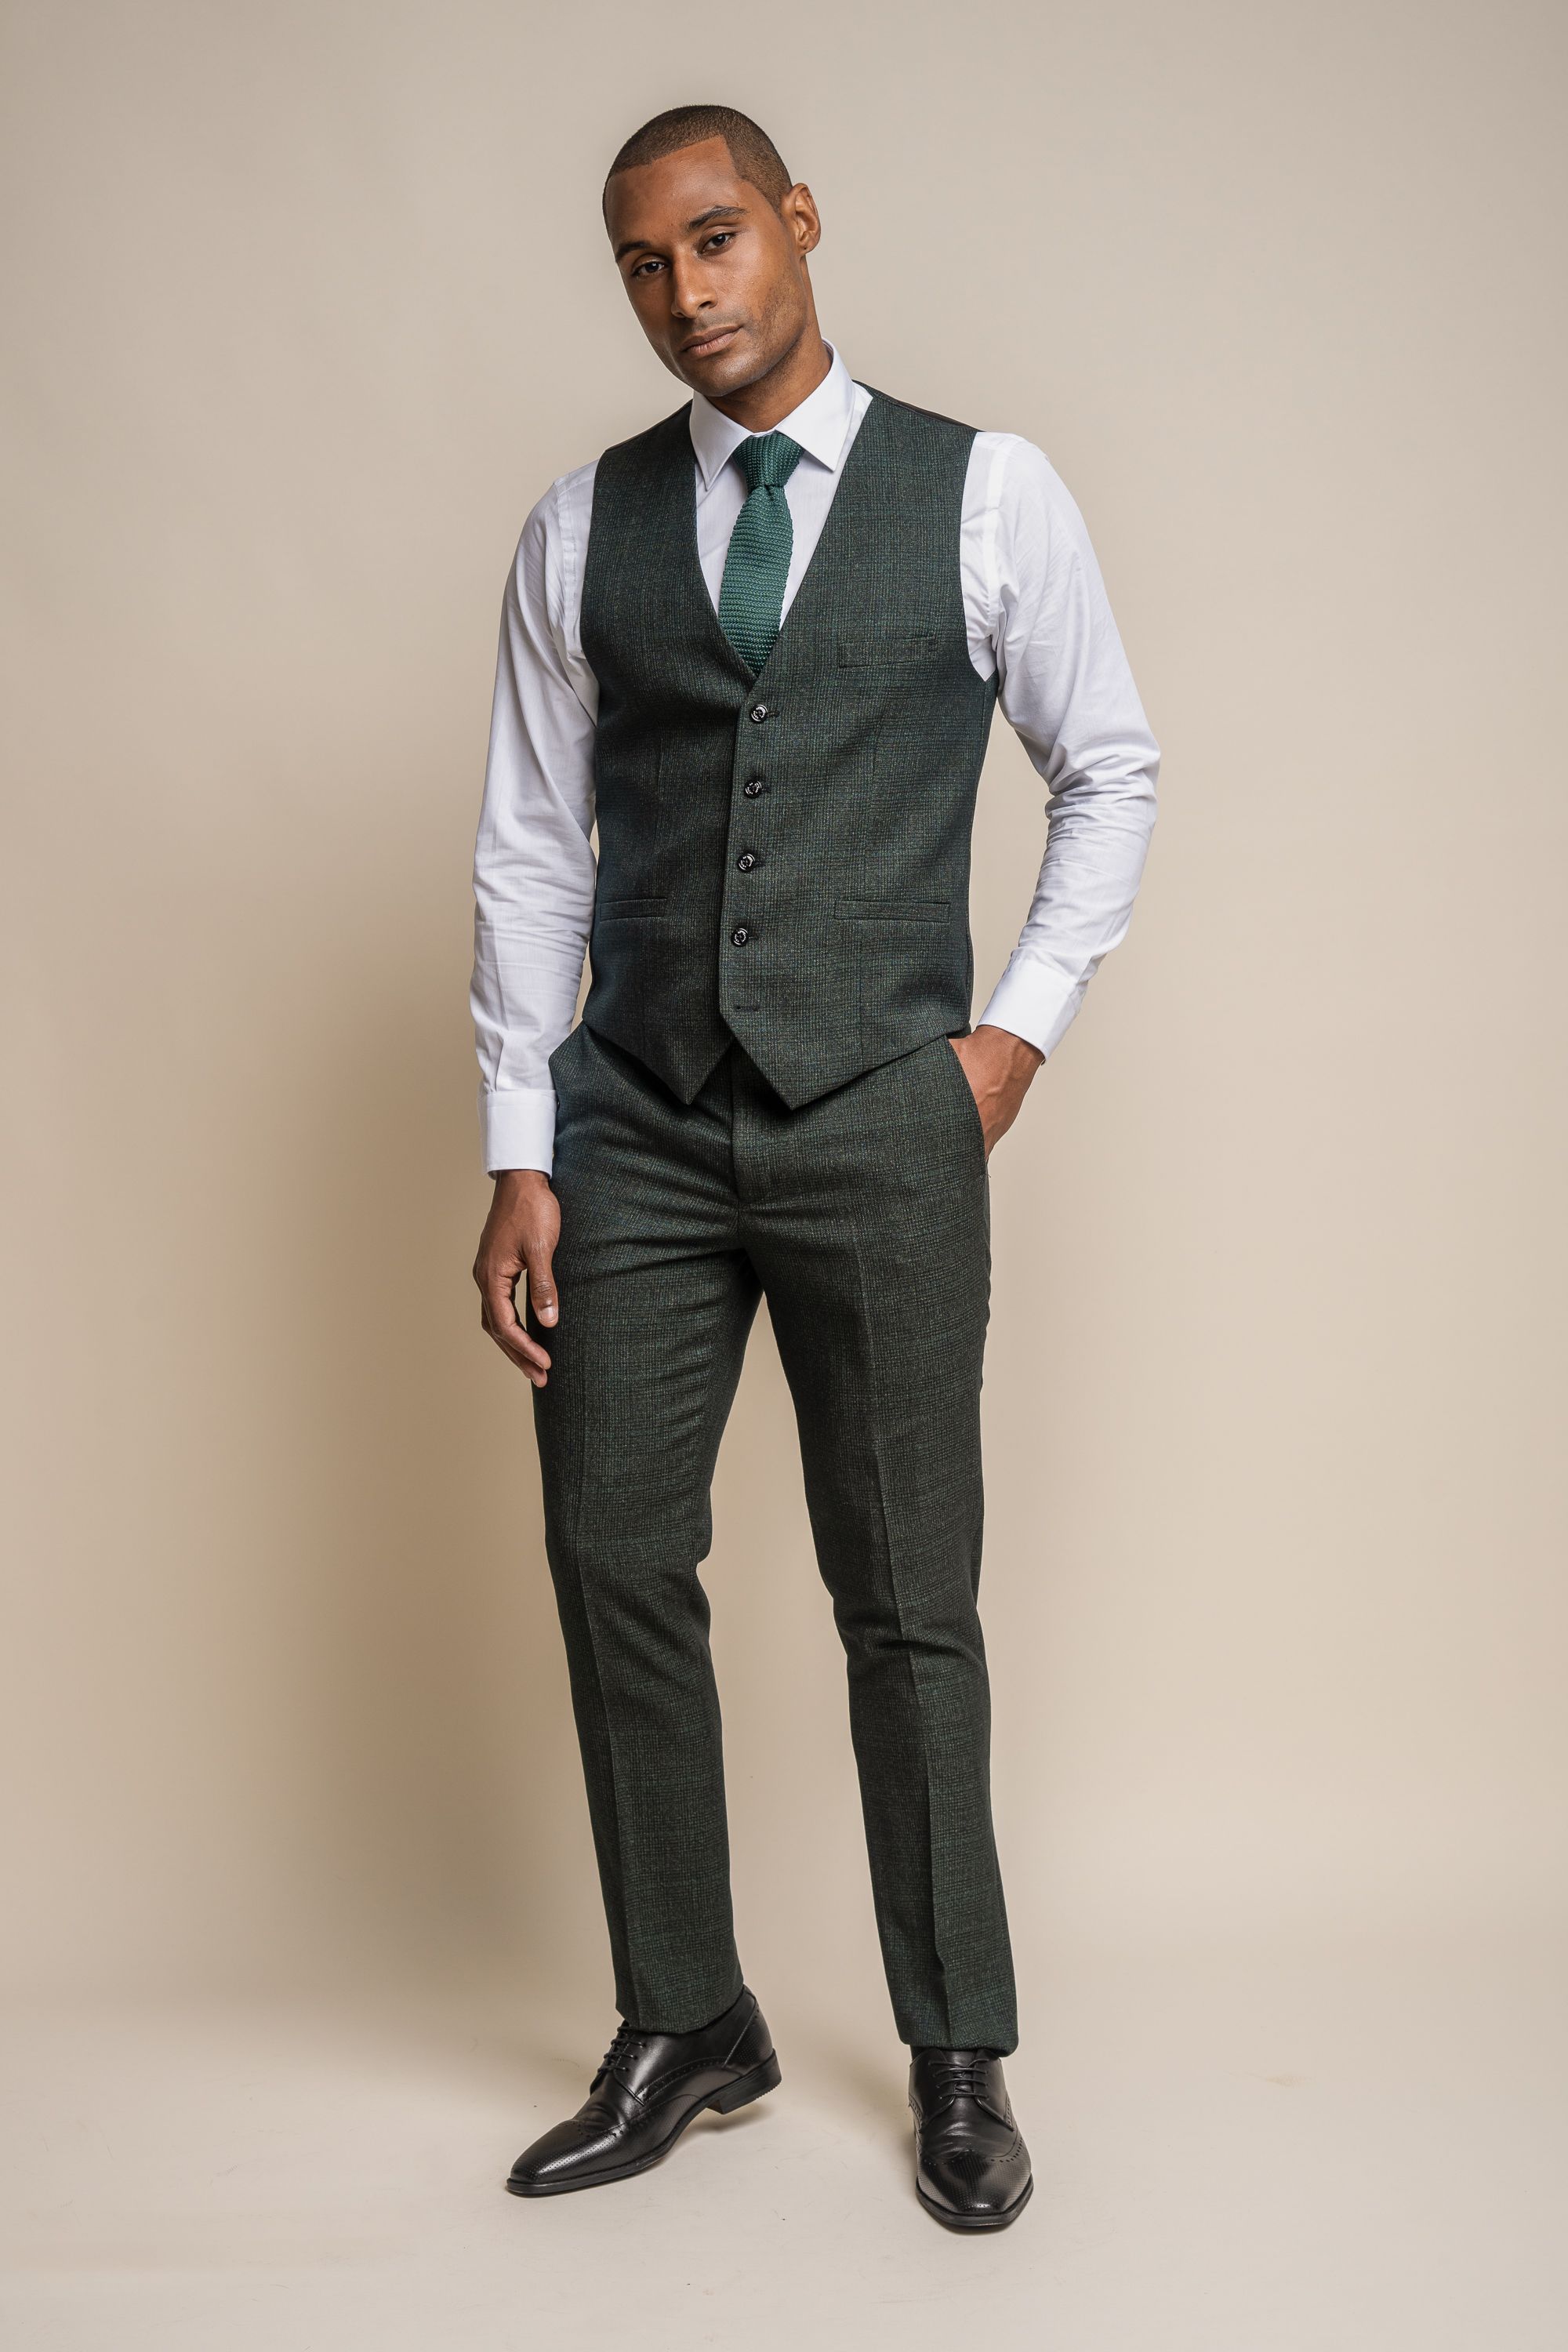 Men's Tweed Houndstooth Check Slim Fit Formal Waistcoat - CARIDI - Olive Green